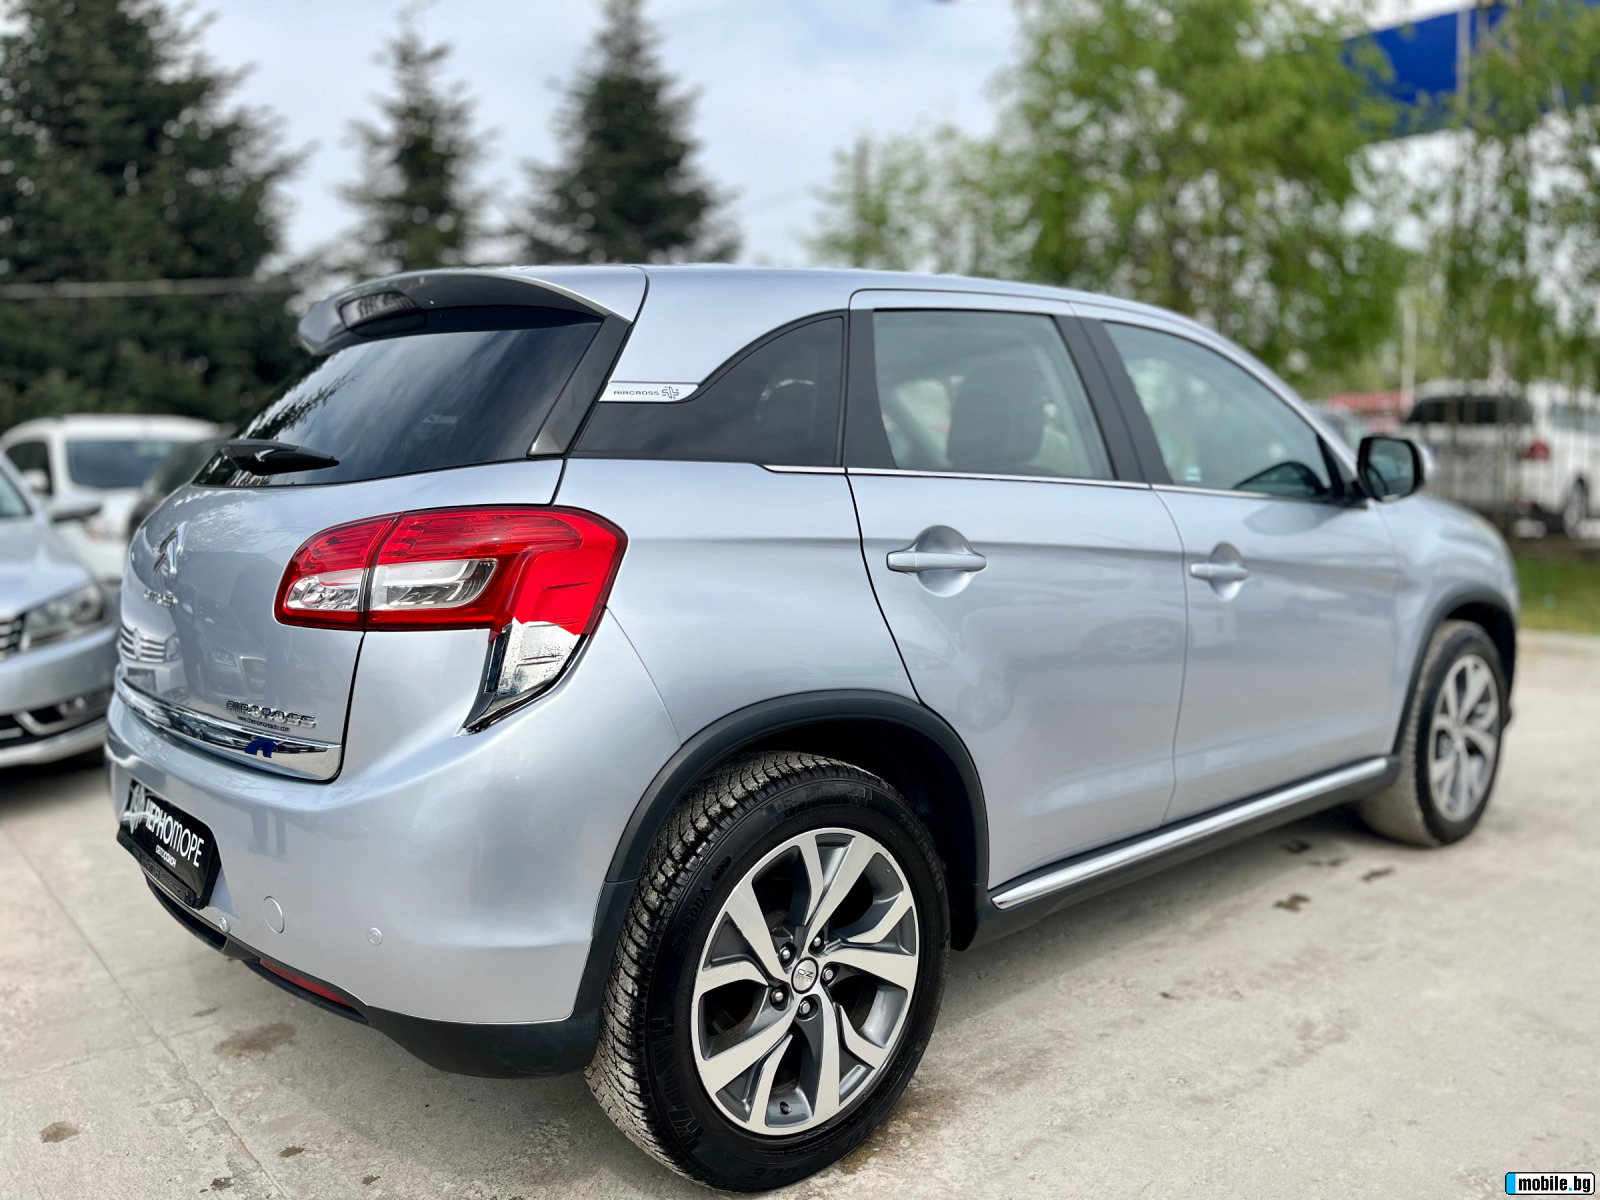 Citroen C4 AIRCROSS 1.6 HDI 4WD Exclusive Start&Stop | Mobile.bg   6